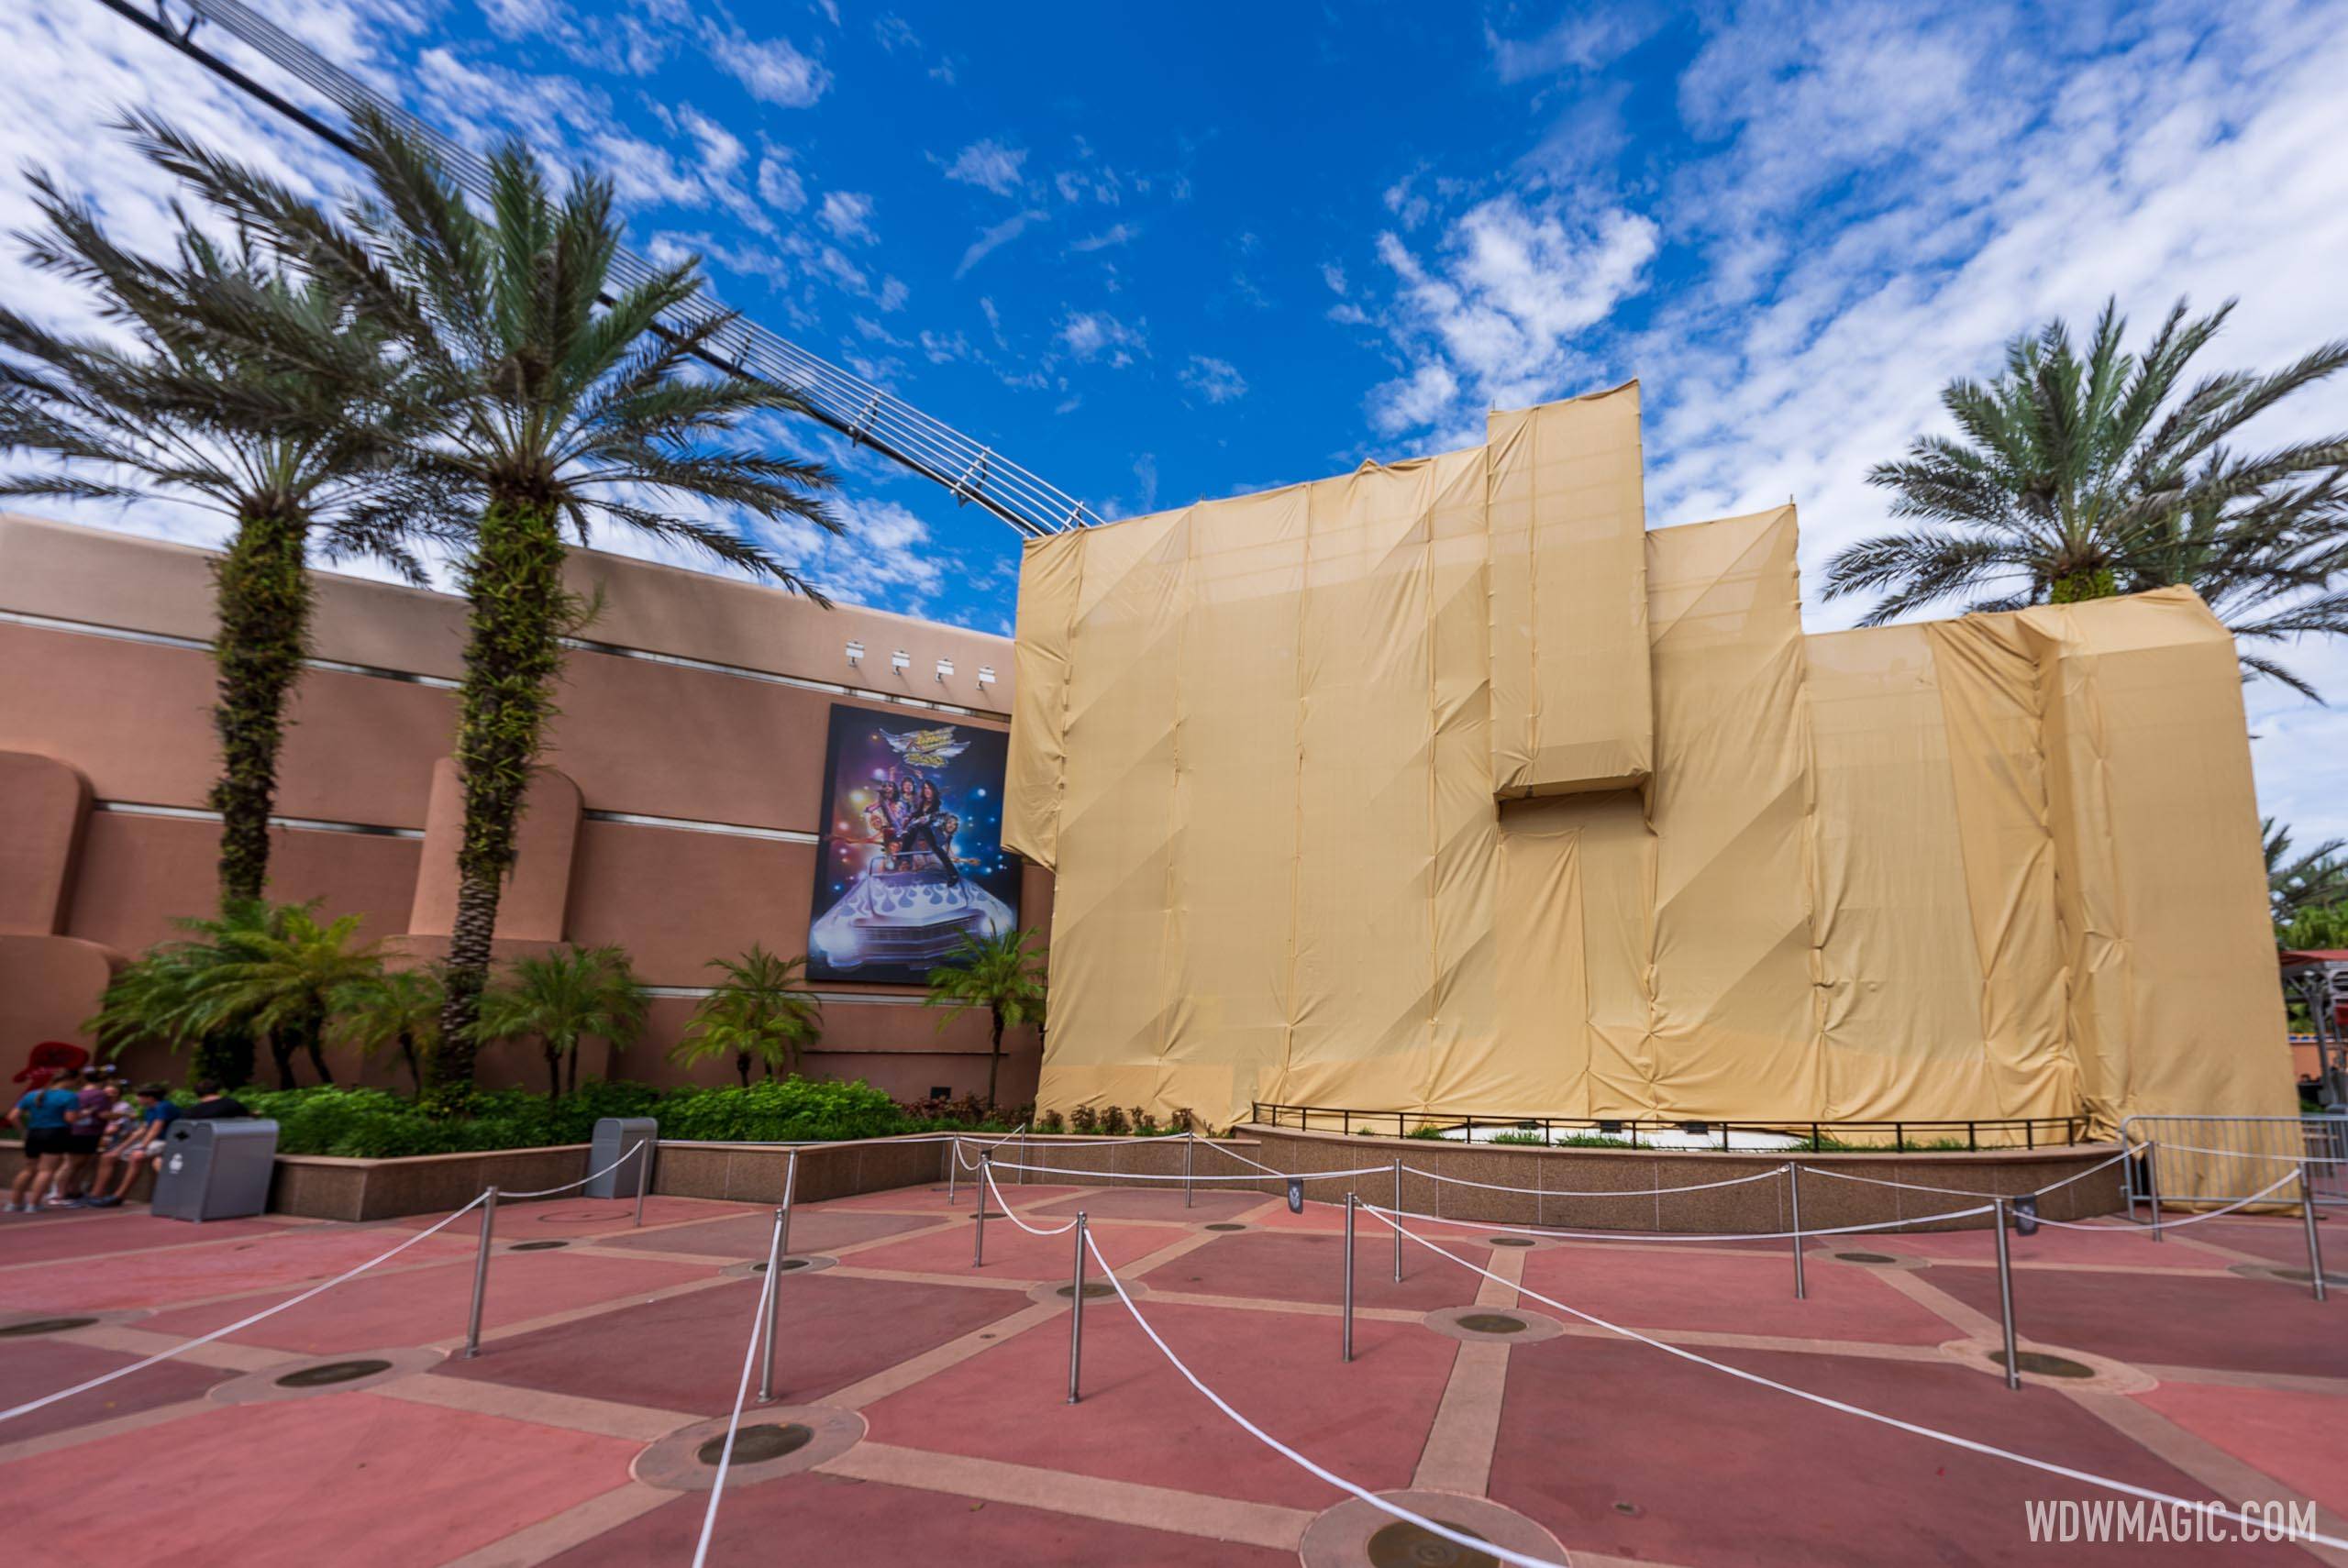 Rock 'n' RollerCoaster's giant Stratocaster behind wraps for refurbishment